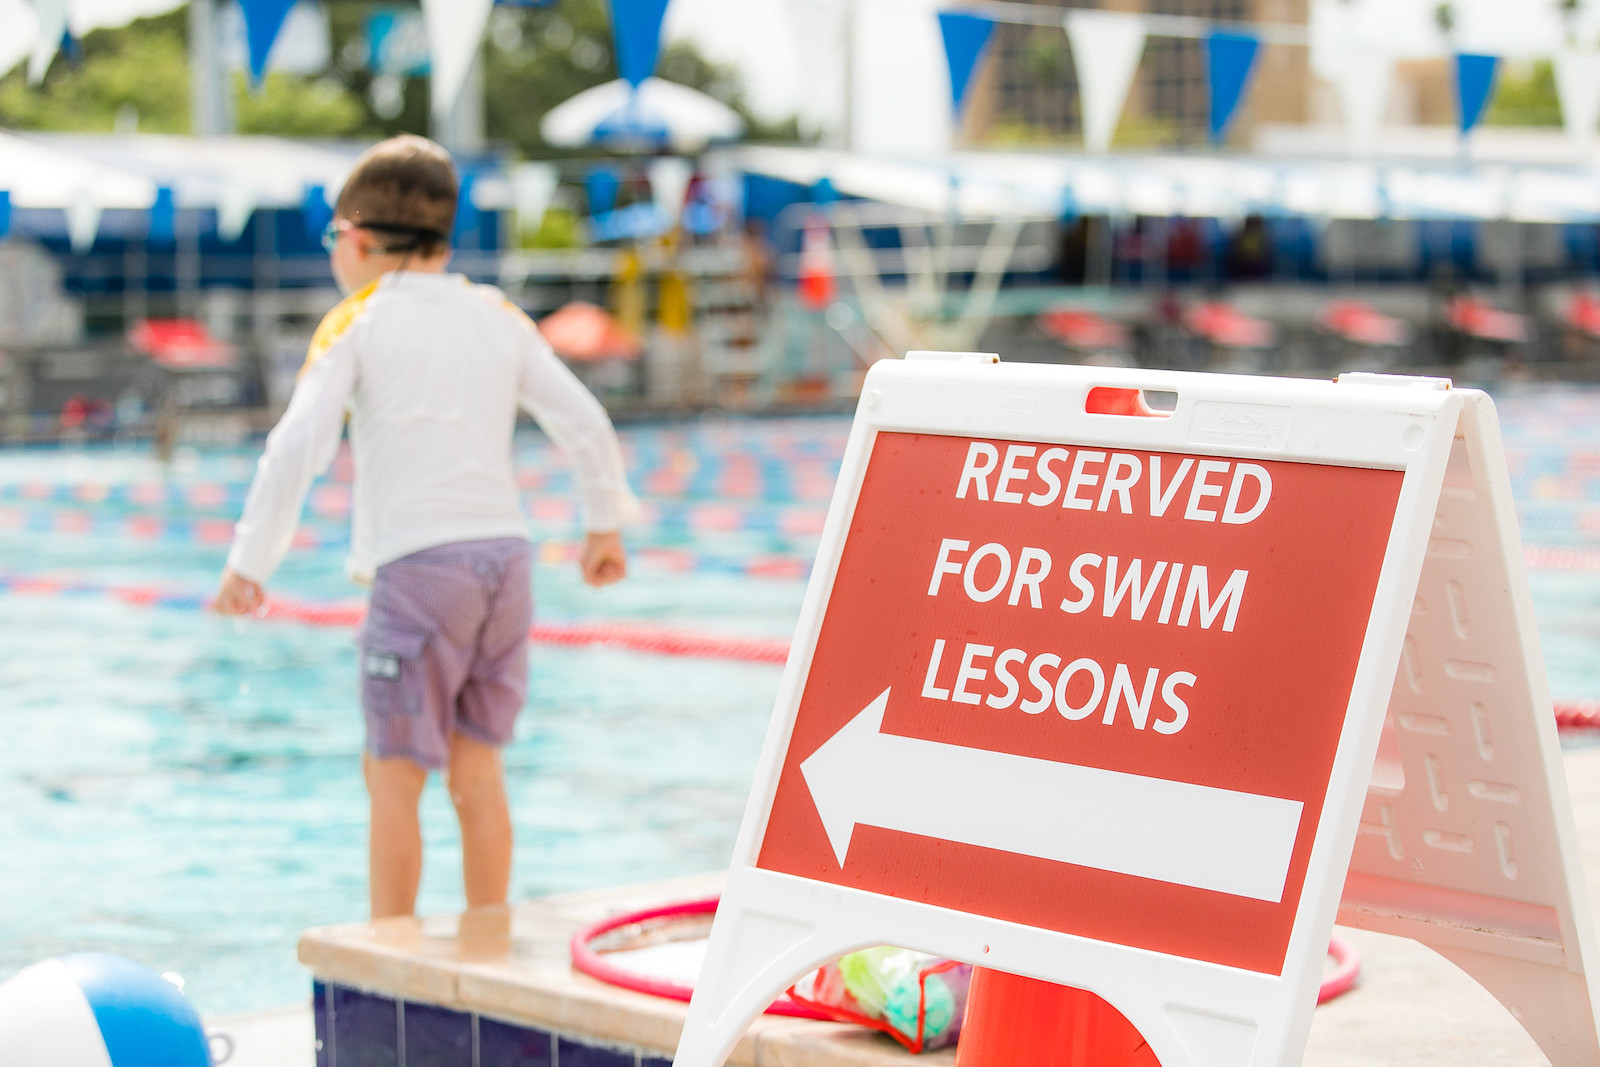 recreation pool with sign that says reserved for swim lessons